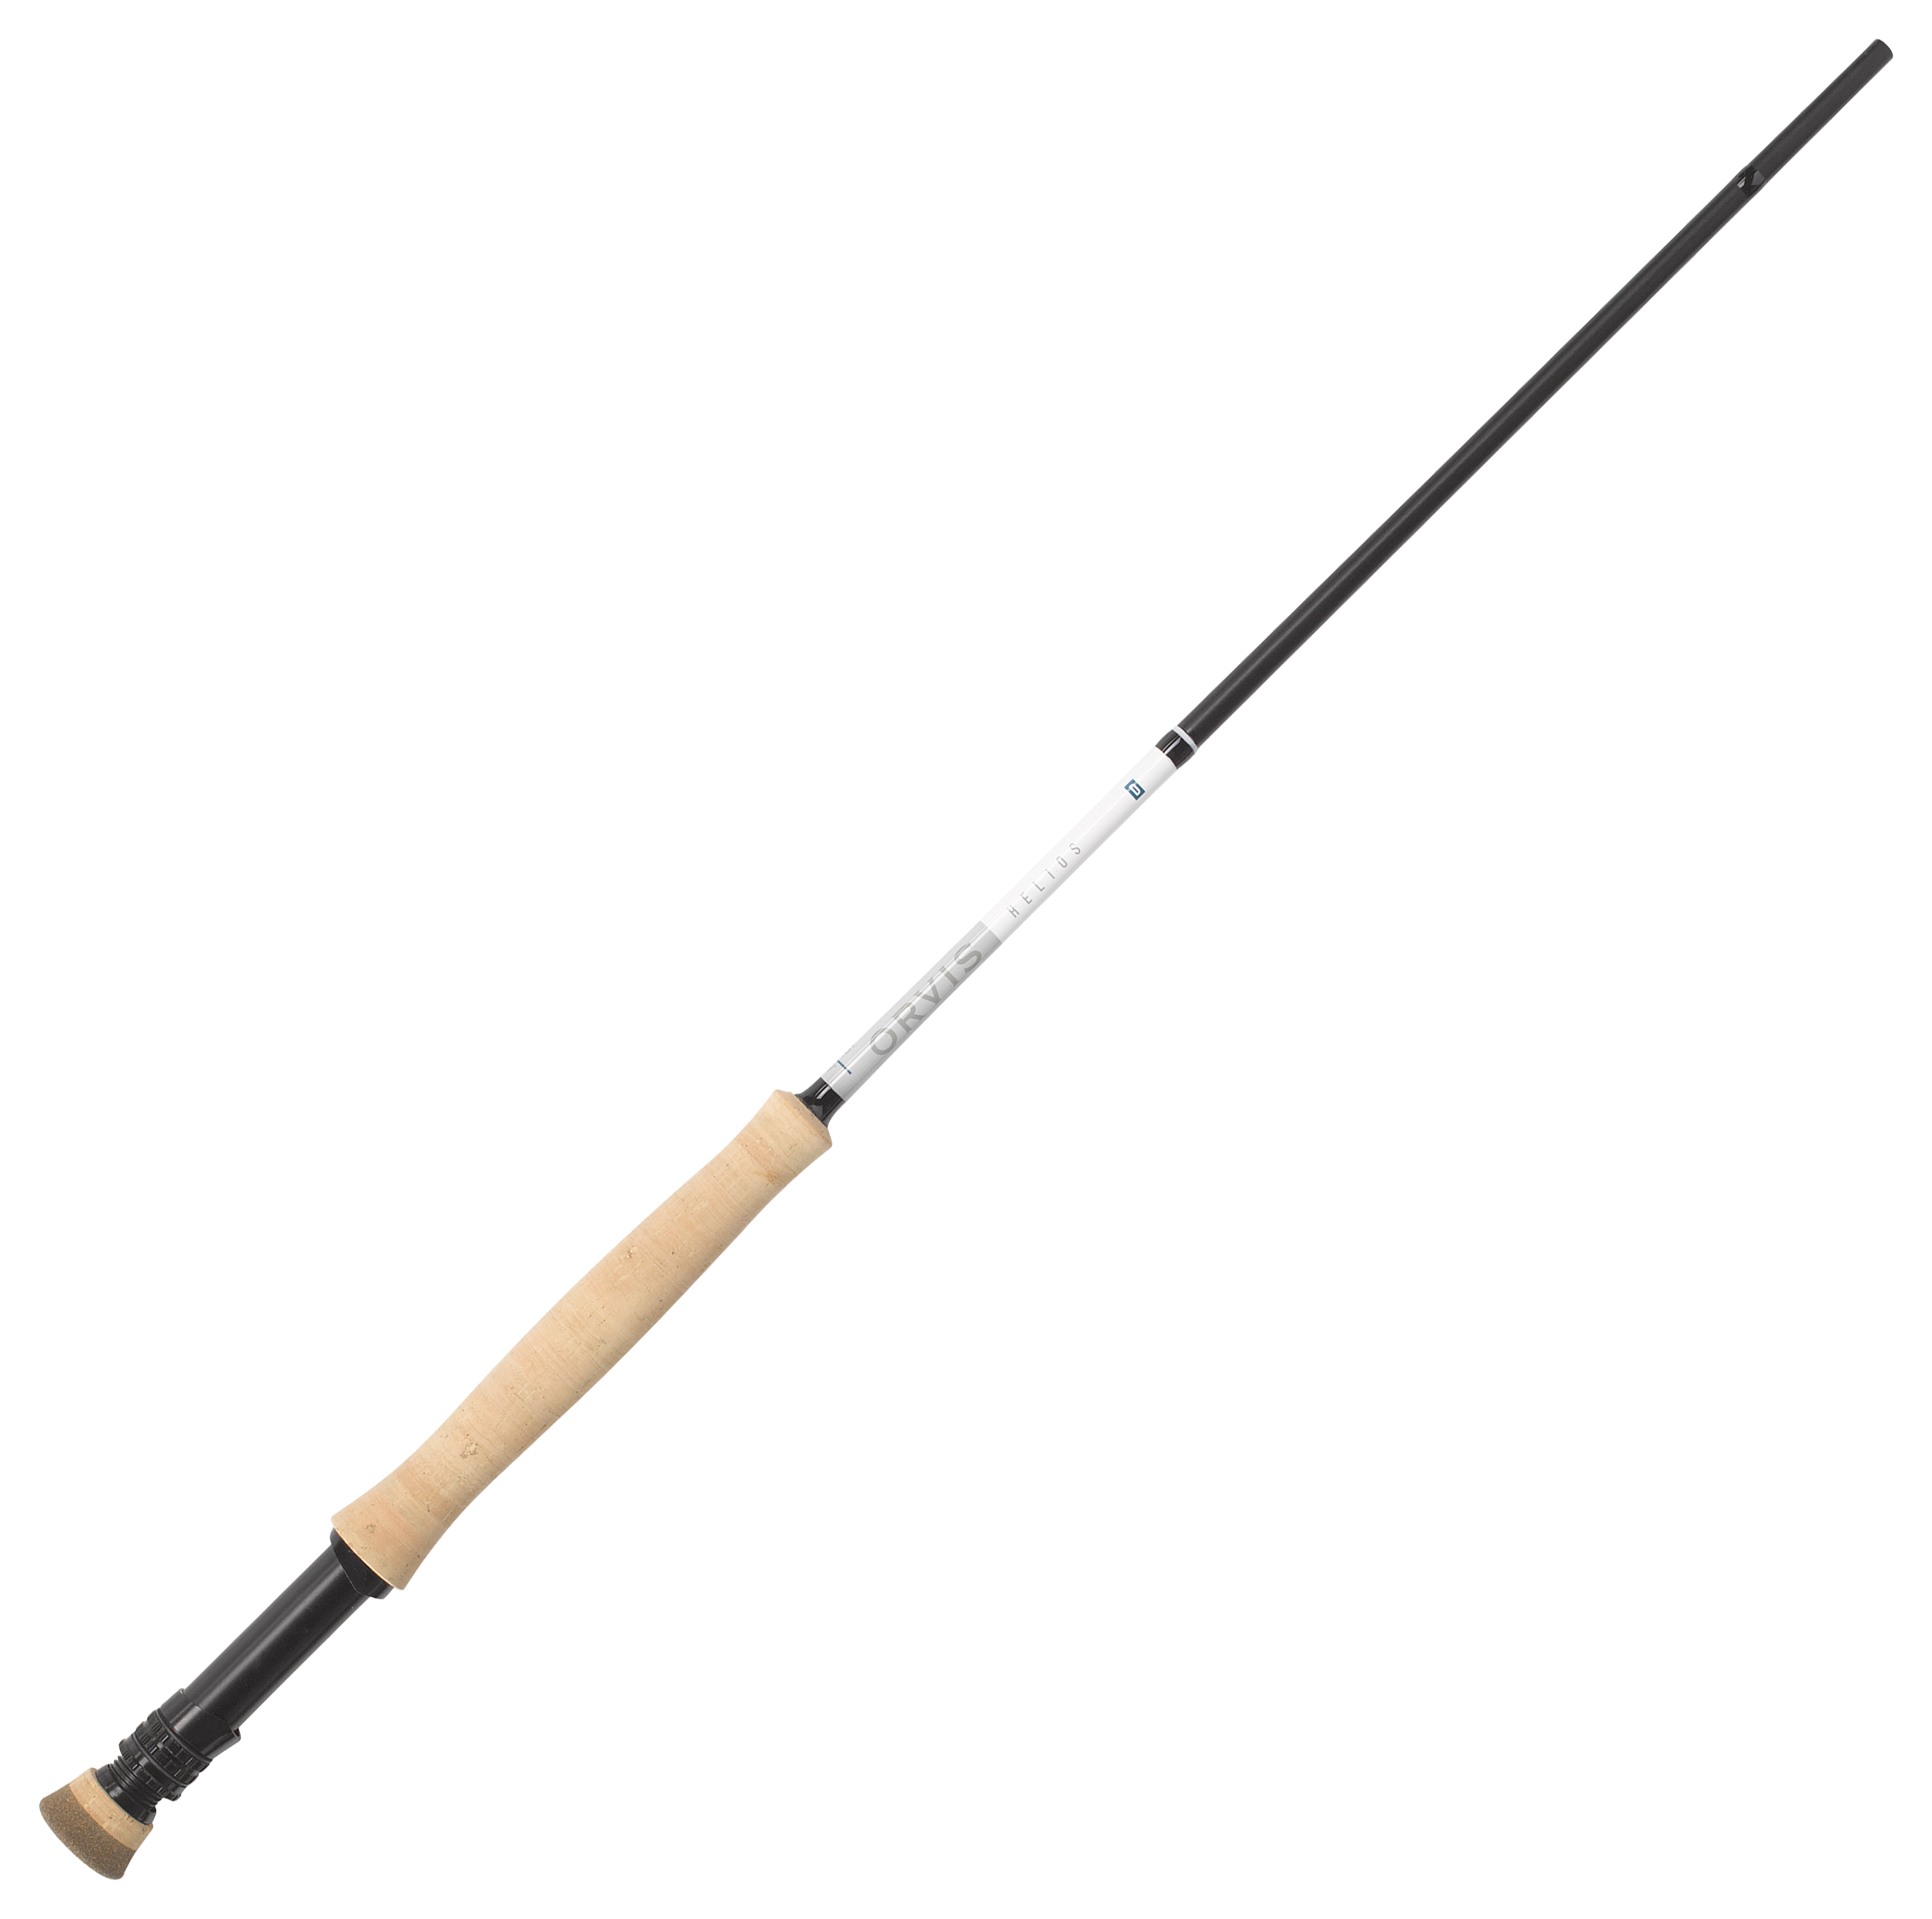 Orvis Helios D Fly Rod - Line Weight 6 - 9'